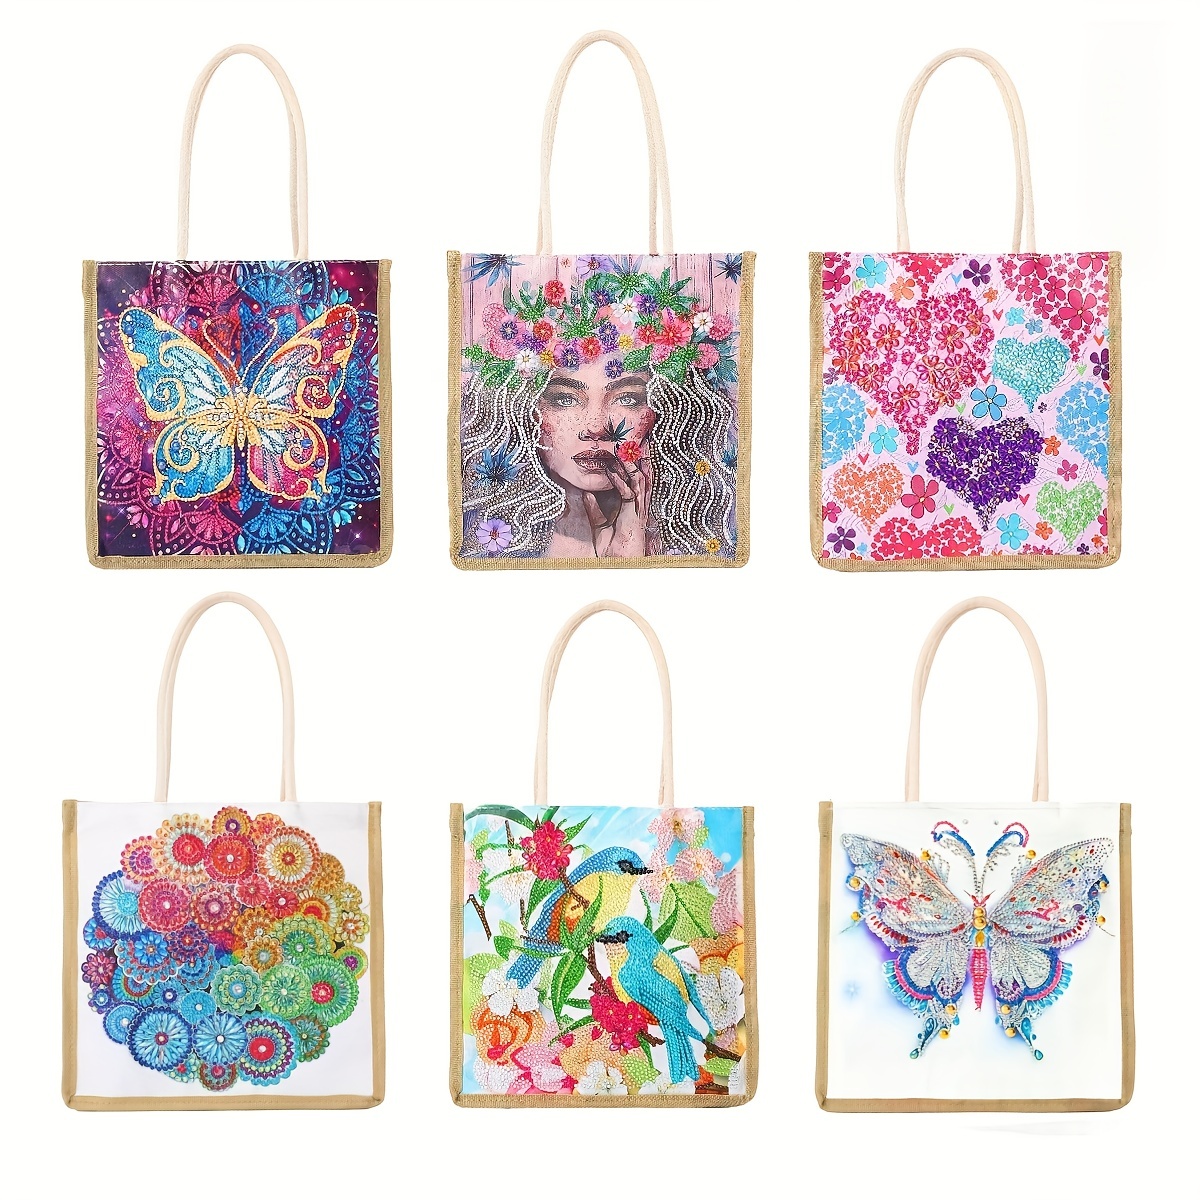 KACASHIP 5D Art Crafts Diamond Painting Shopping Canvastote Storage Bags Square Synthetic Lover Pattern Reusable Handbags for Adults Women Kids